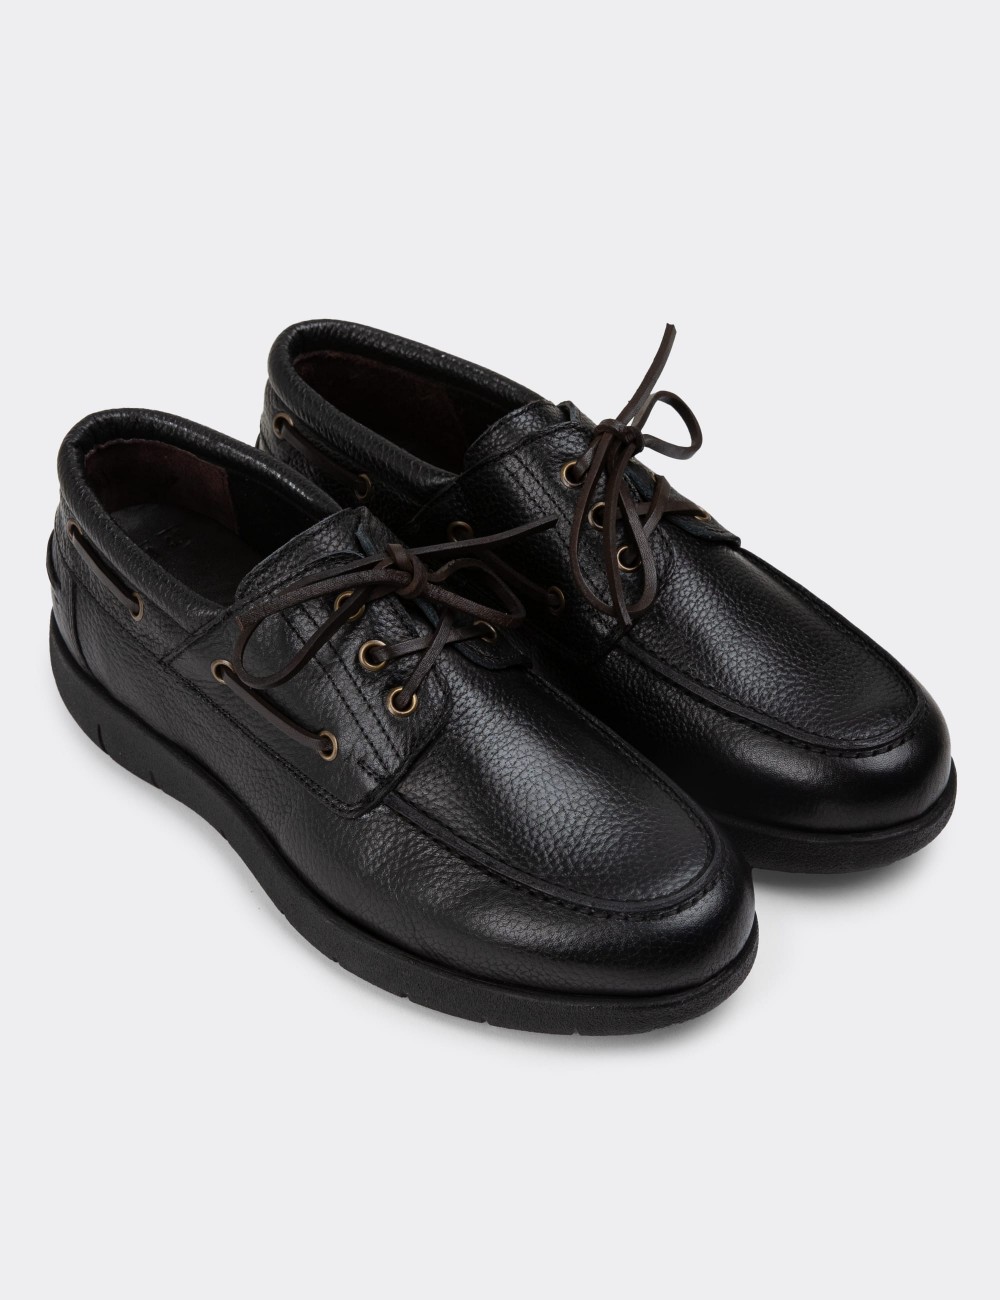 Black Leather Lace-up Shoes - 01941MSYHC01